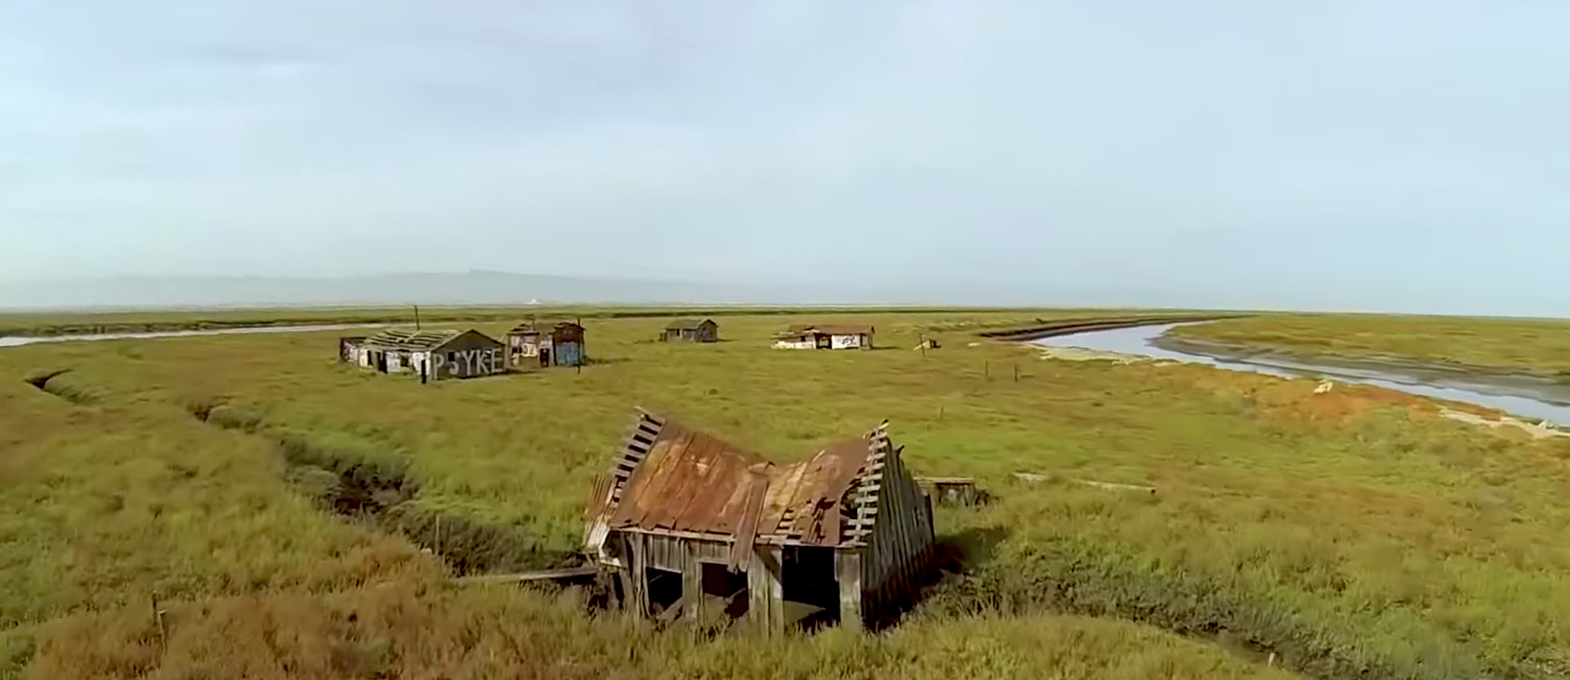 LISTEN: The Island Ghost Town in the Middle of San Francisco Bay